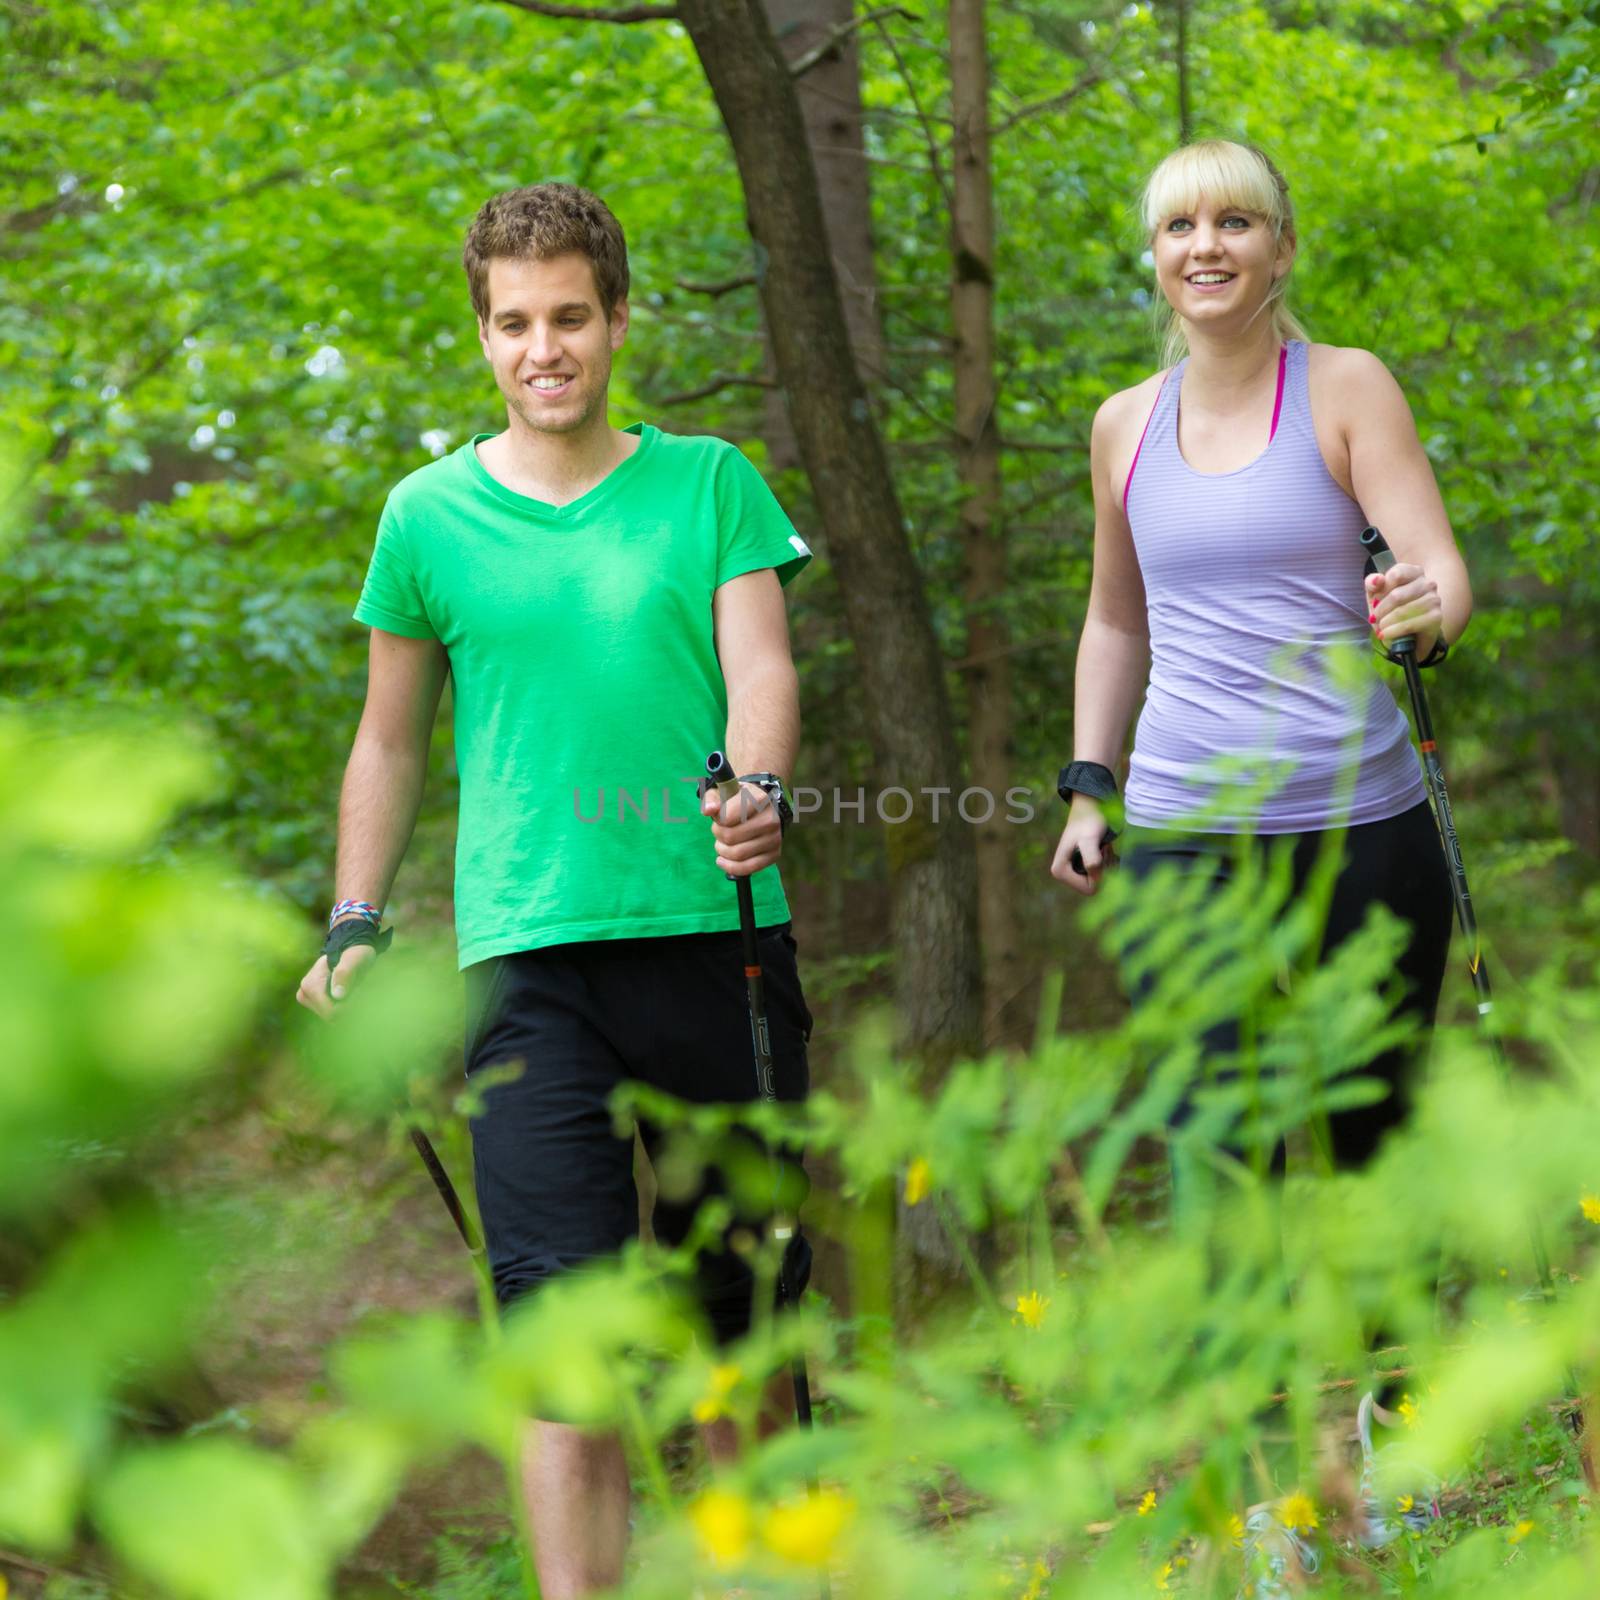 Young spoty active cople with hiking sticks walking in nature. Active lifestyle. Activities and recreation outdoors.